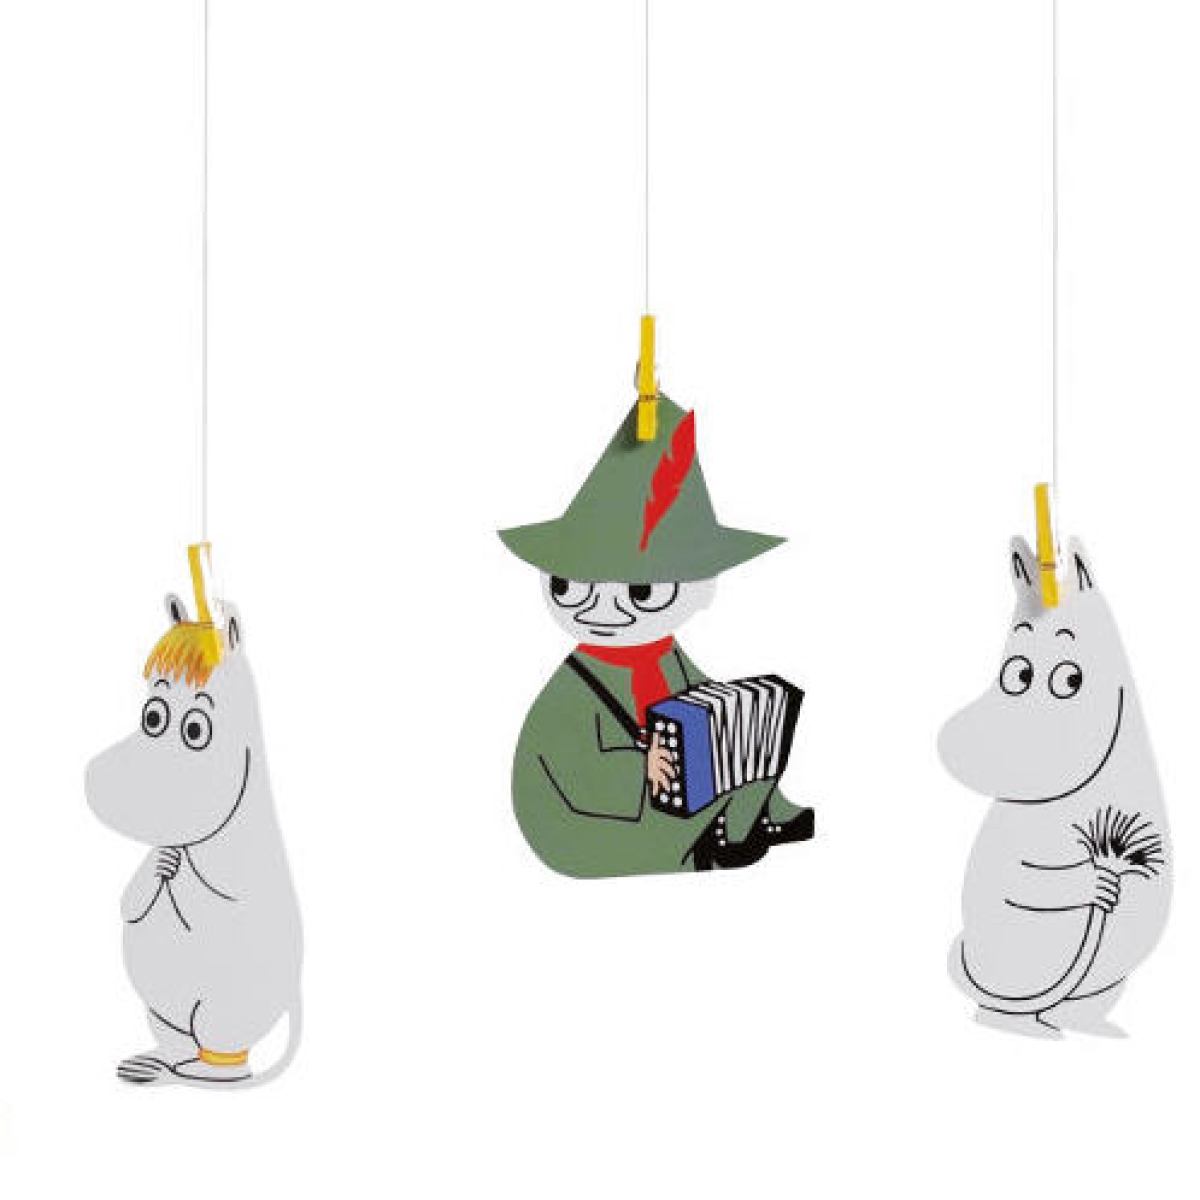 Scandinavian Children's Mobile with Moomins Characters by Tove Jansson